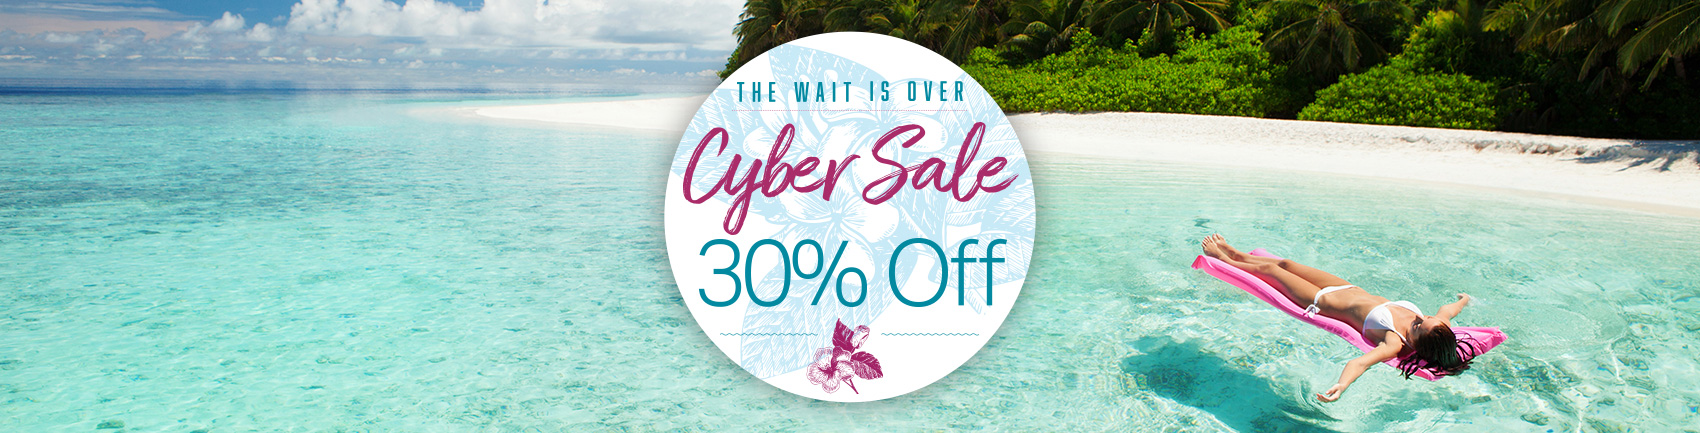 The Wait Is Over. Cyber Sale 30% Off.